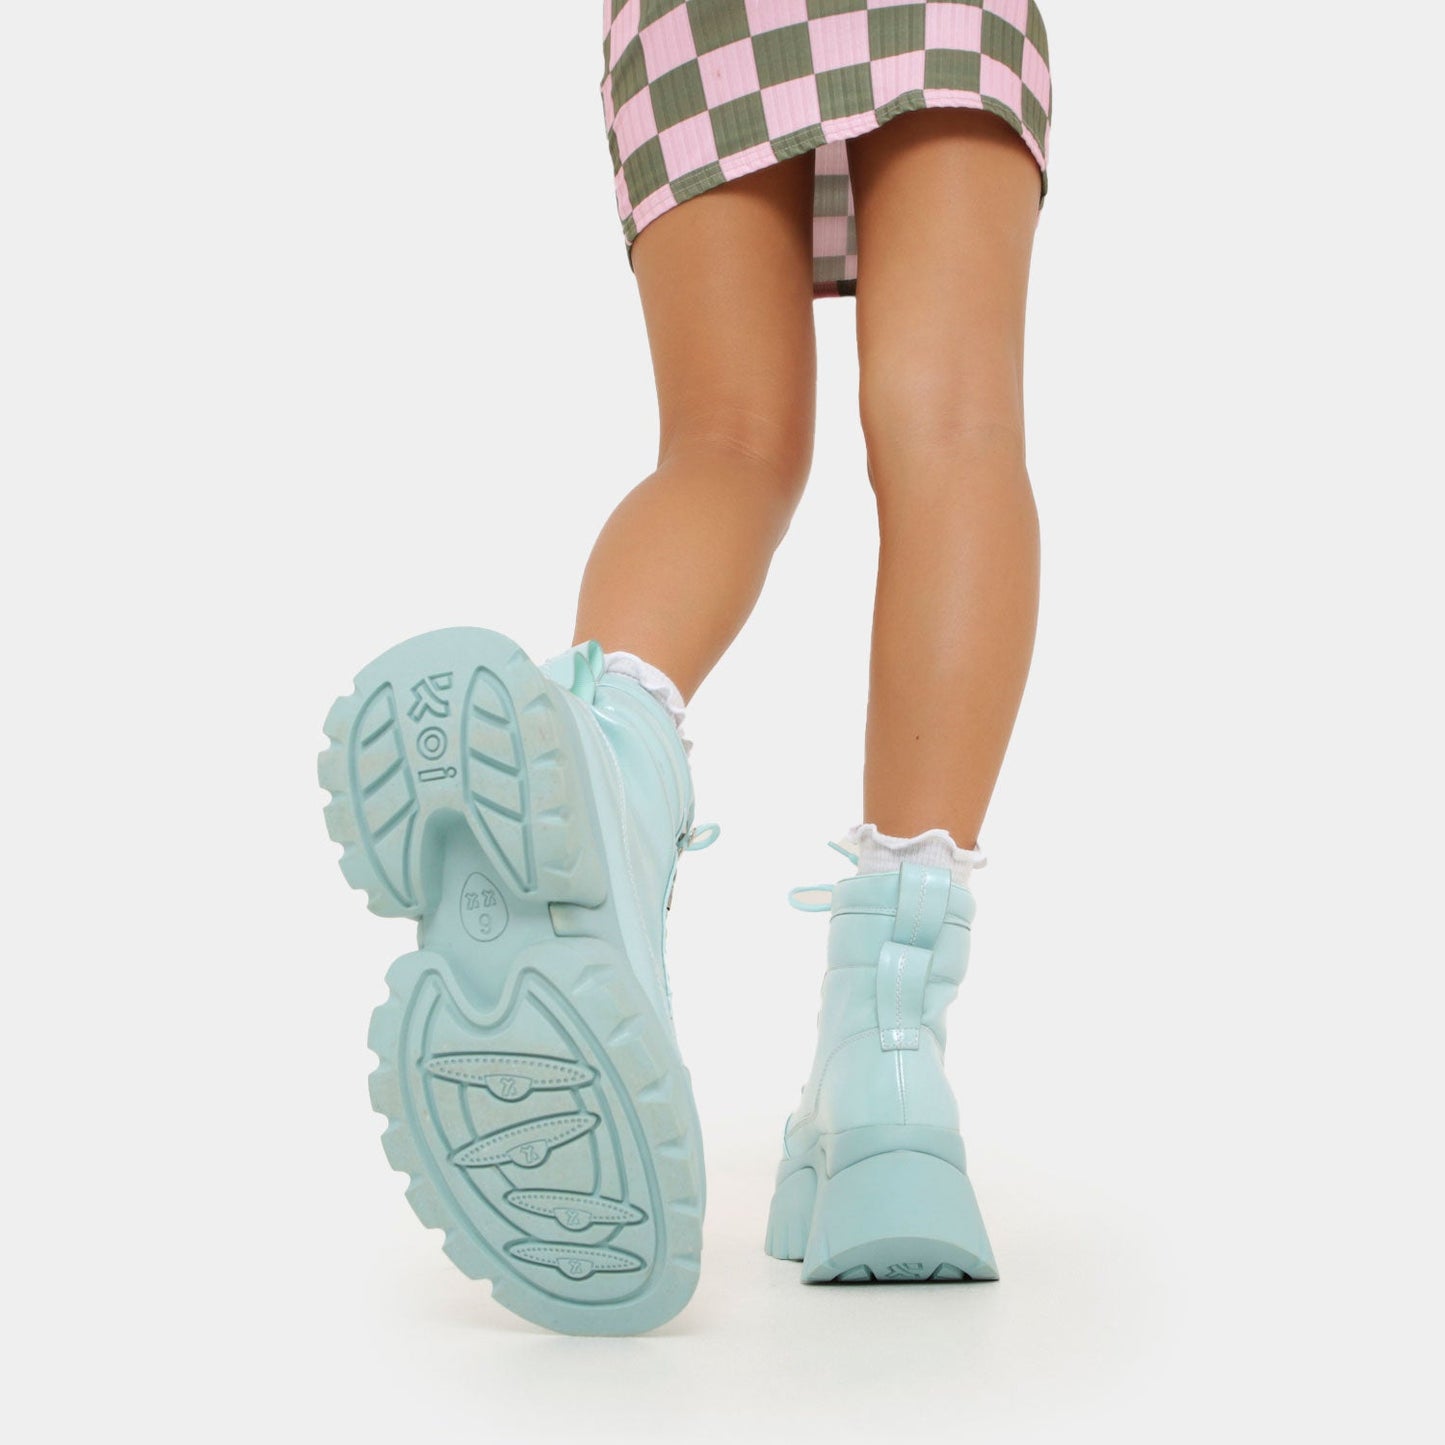 Gooey Baby Blue Platform Boots - Ankle Boots - KOI Footwear - Blue - Model Sole View